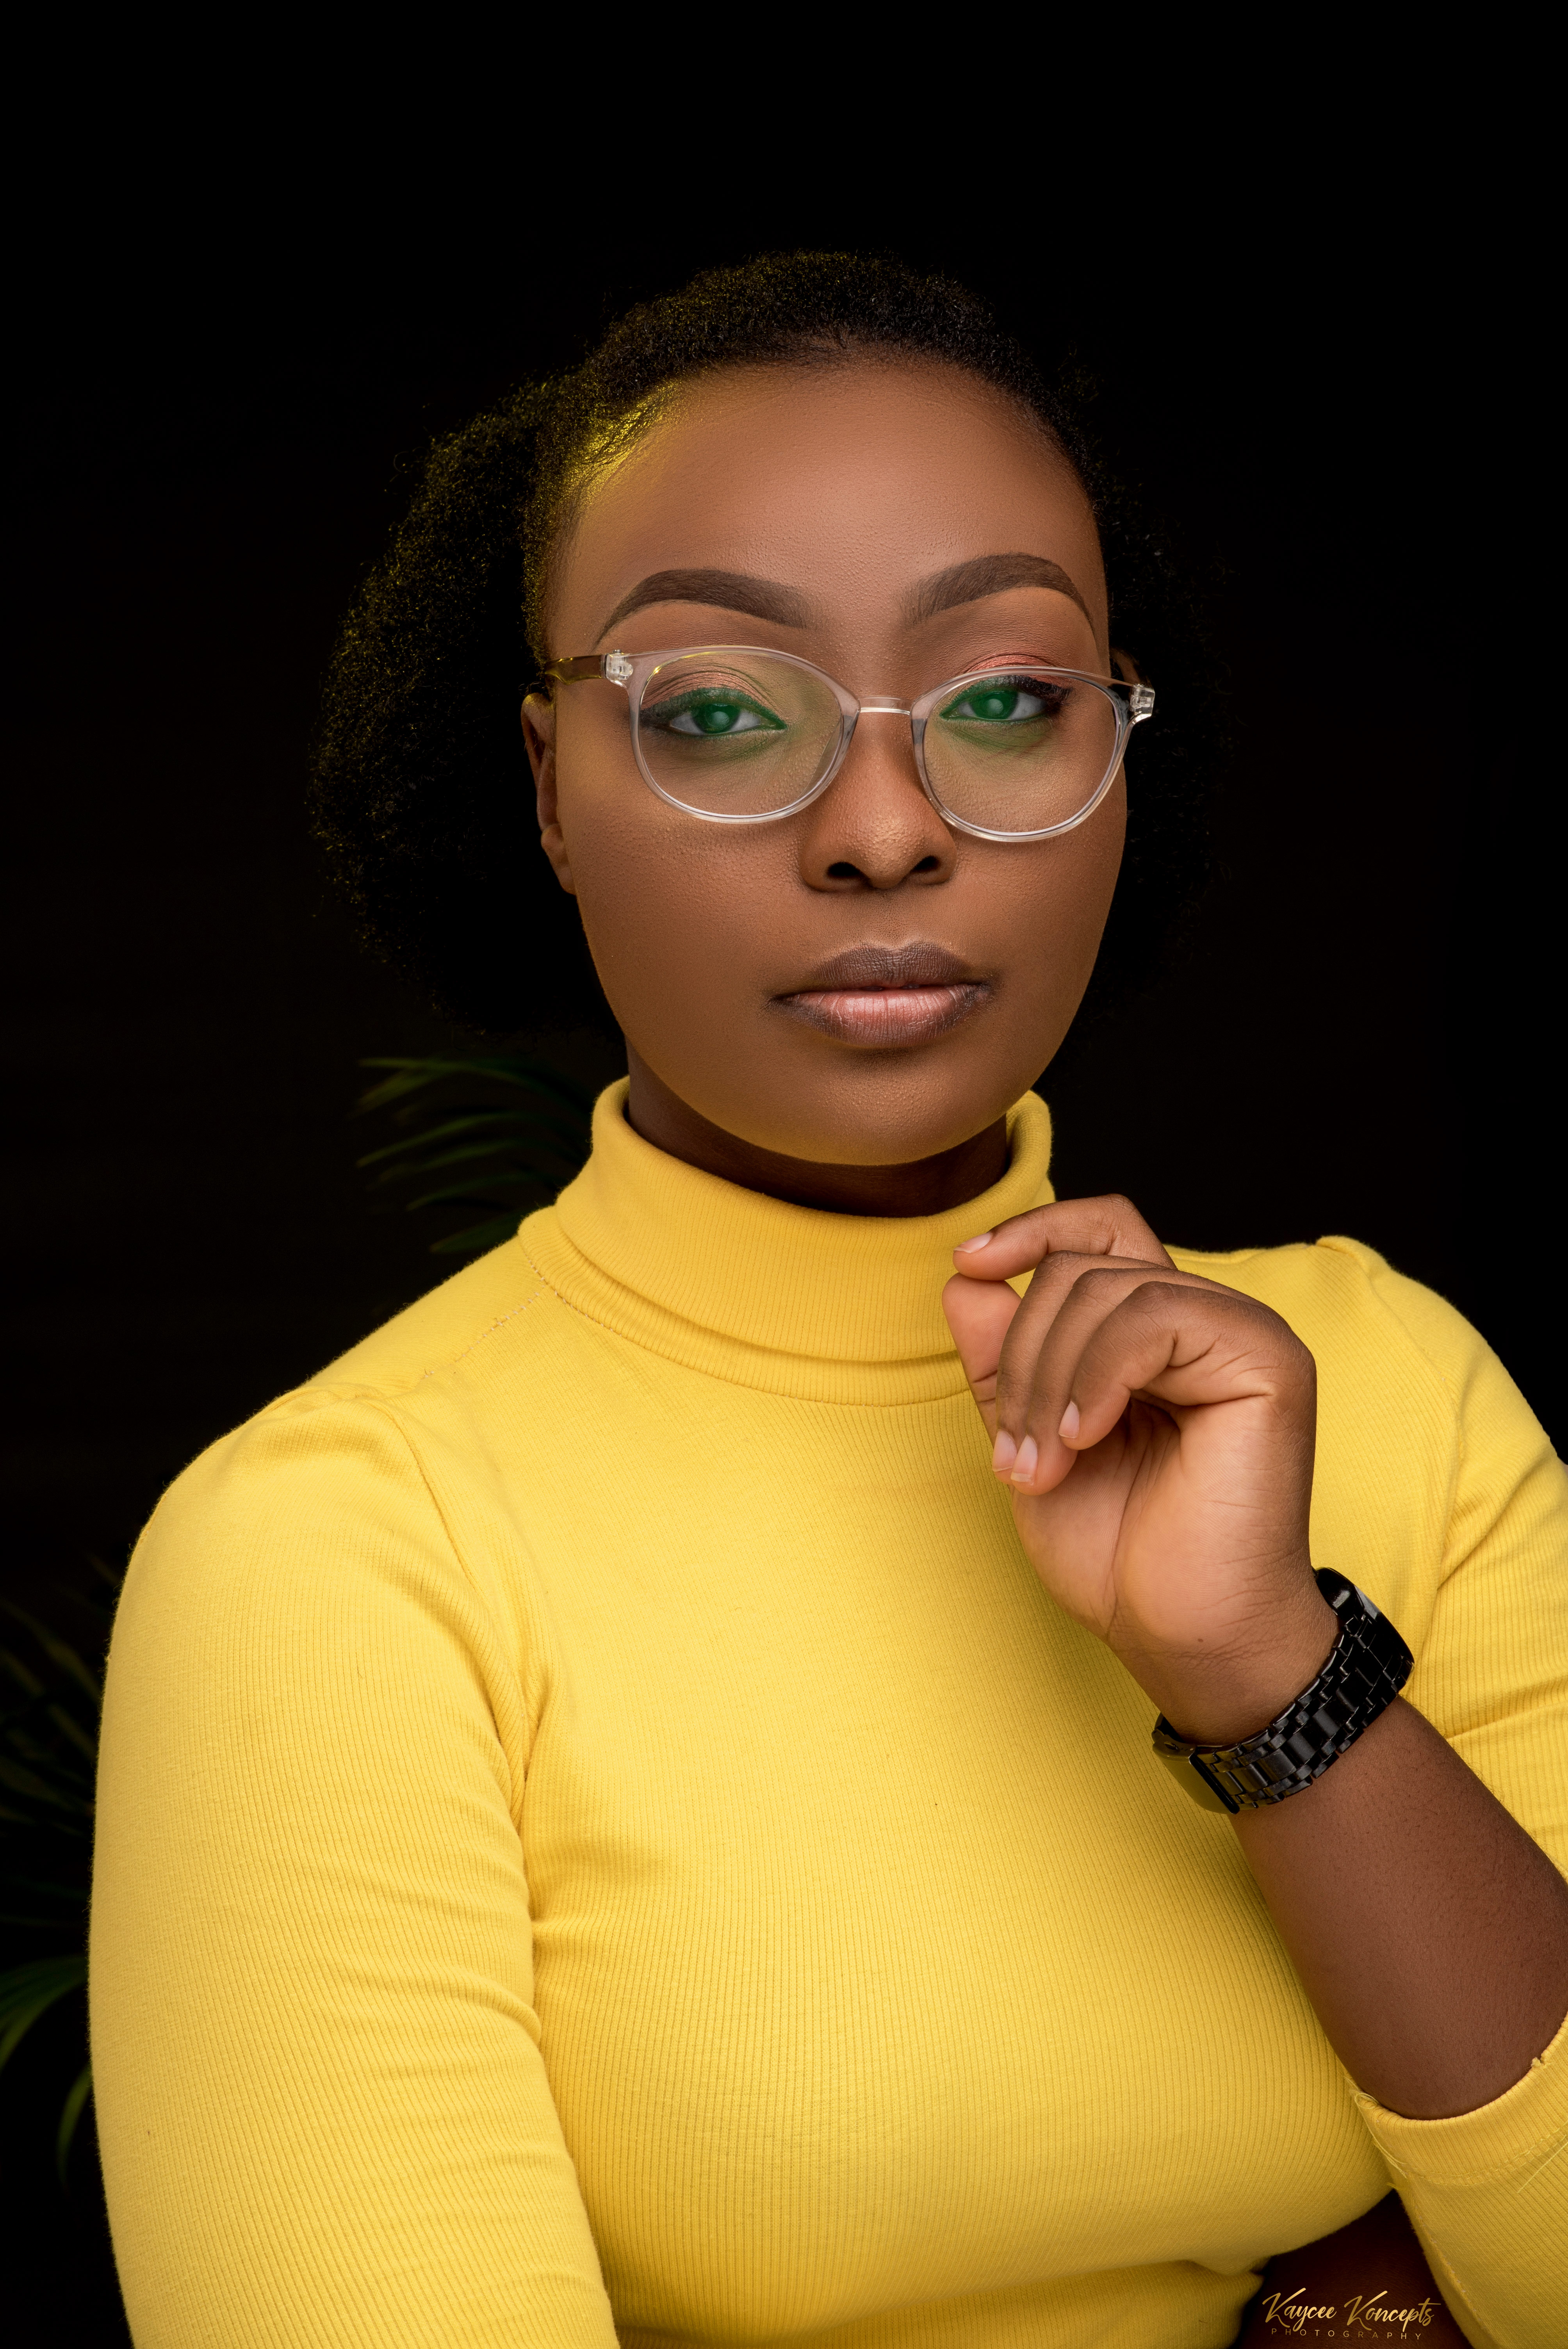 A photo of Favour, she is a black woman wearing a yellow polar neck jumper and clear-framed glasses with her hair tied back. She has her left hand raised to her face and is photographed against a black background.